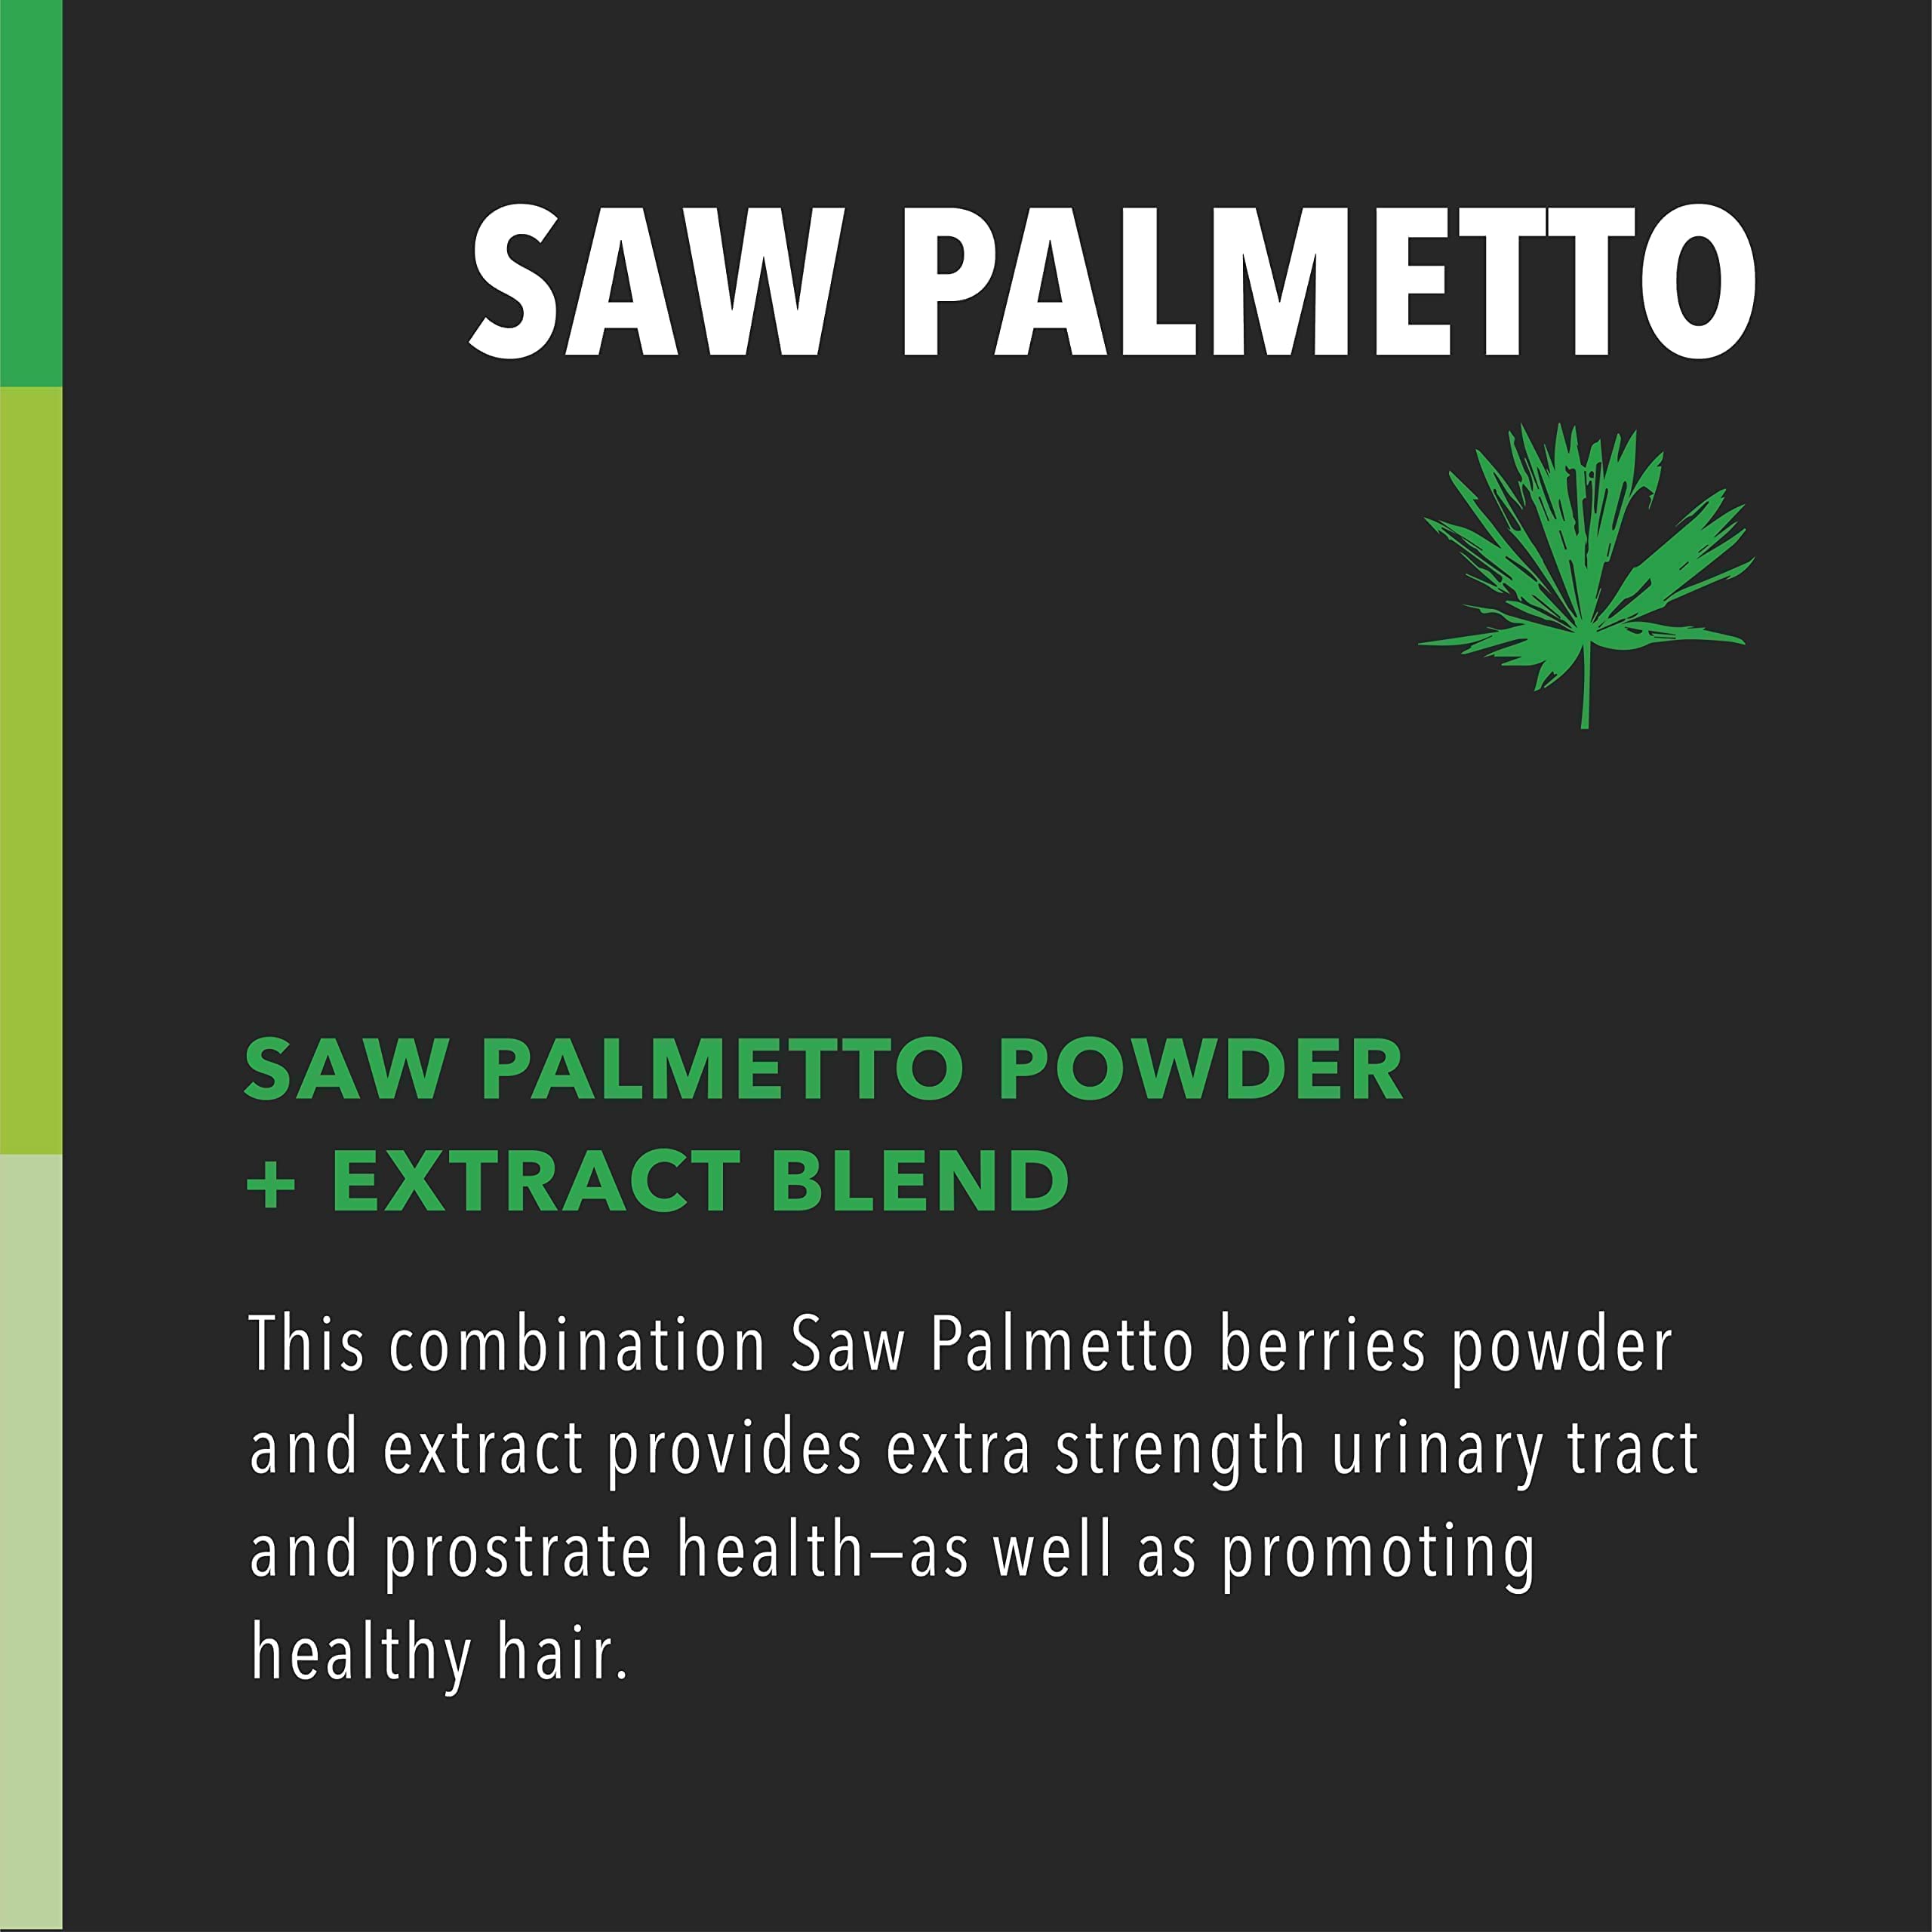 HAVASU NUTRITION Saw Palmetto Herbal Supplement and Horny Goat Weed Capsules Bundle for Increased Libido and Enhancement with Clinical Ingredients